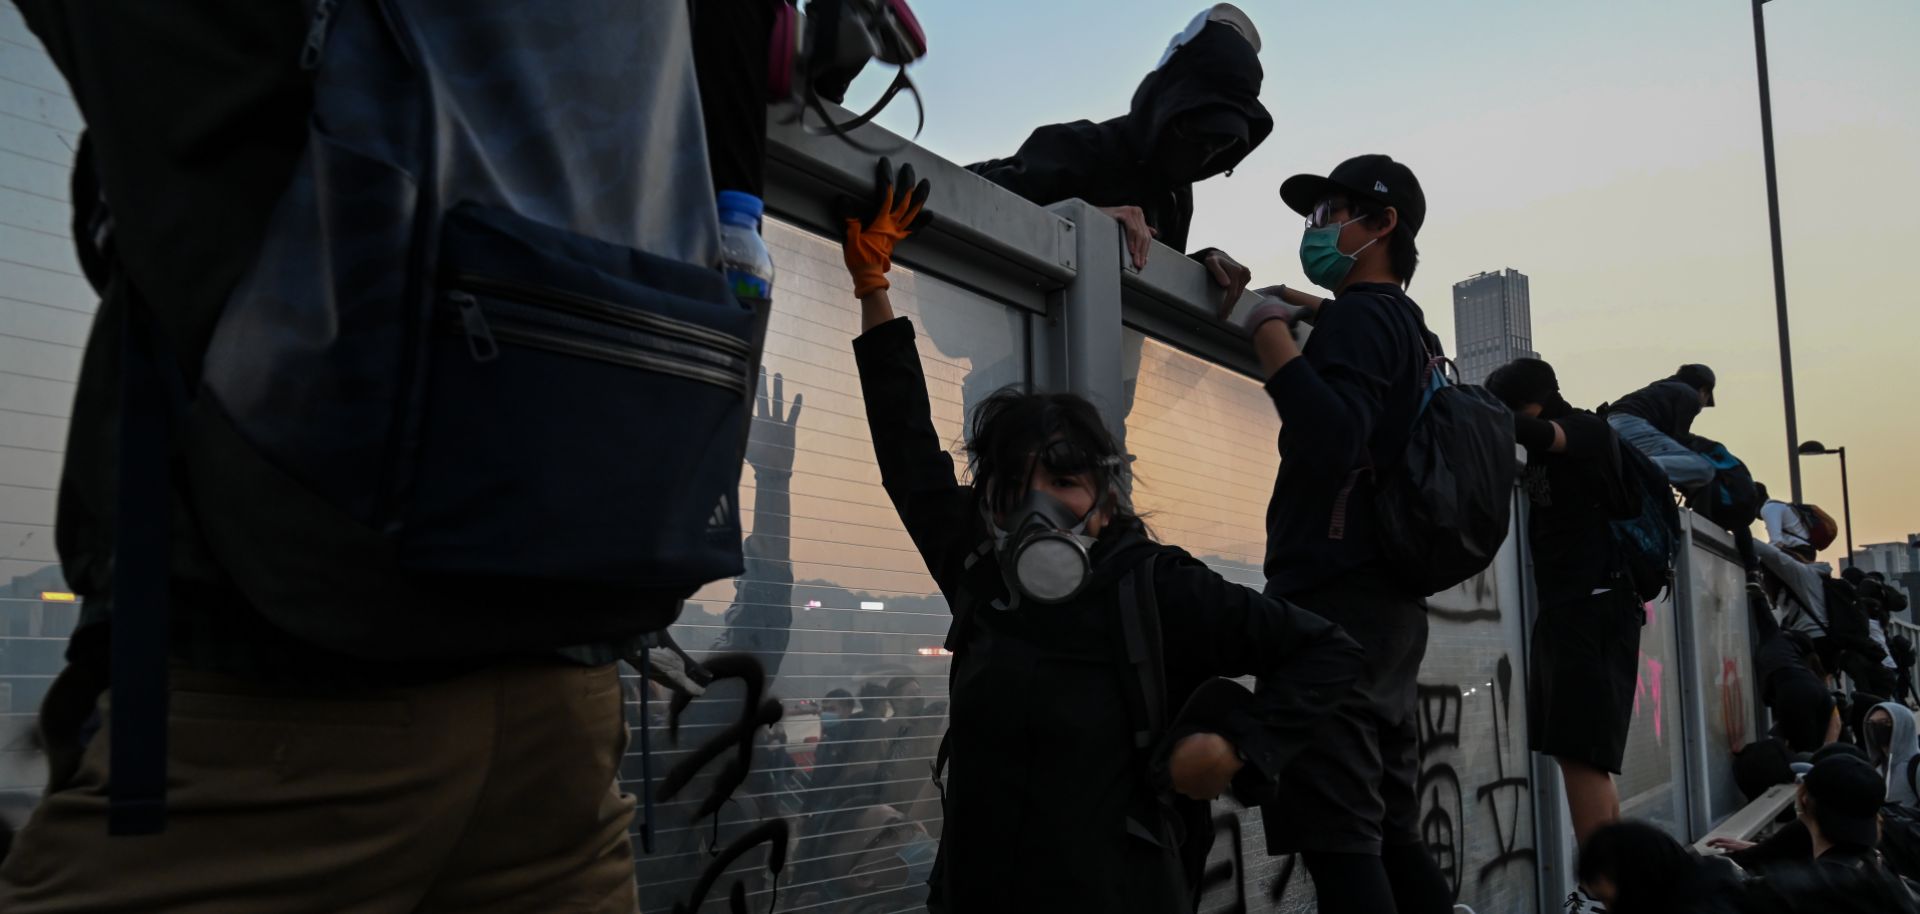 This photo shows pro-democracy protesters in Hong Kong fleeing from police by climbing over highway dividers during a mass rally on Dec. 1, 2019.